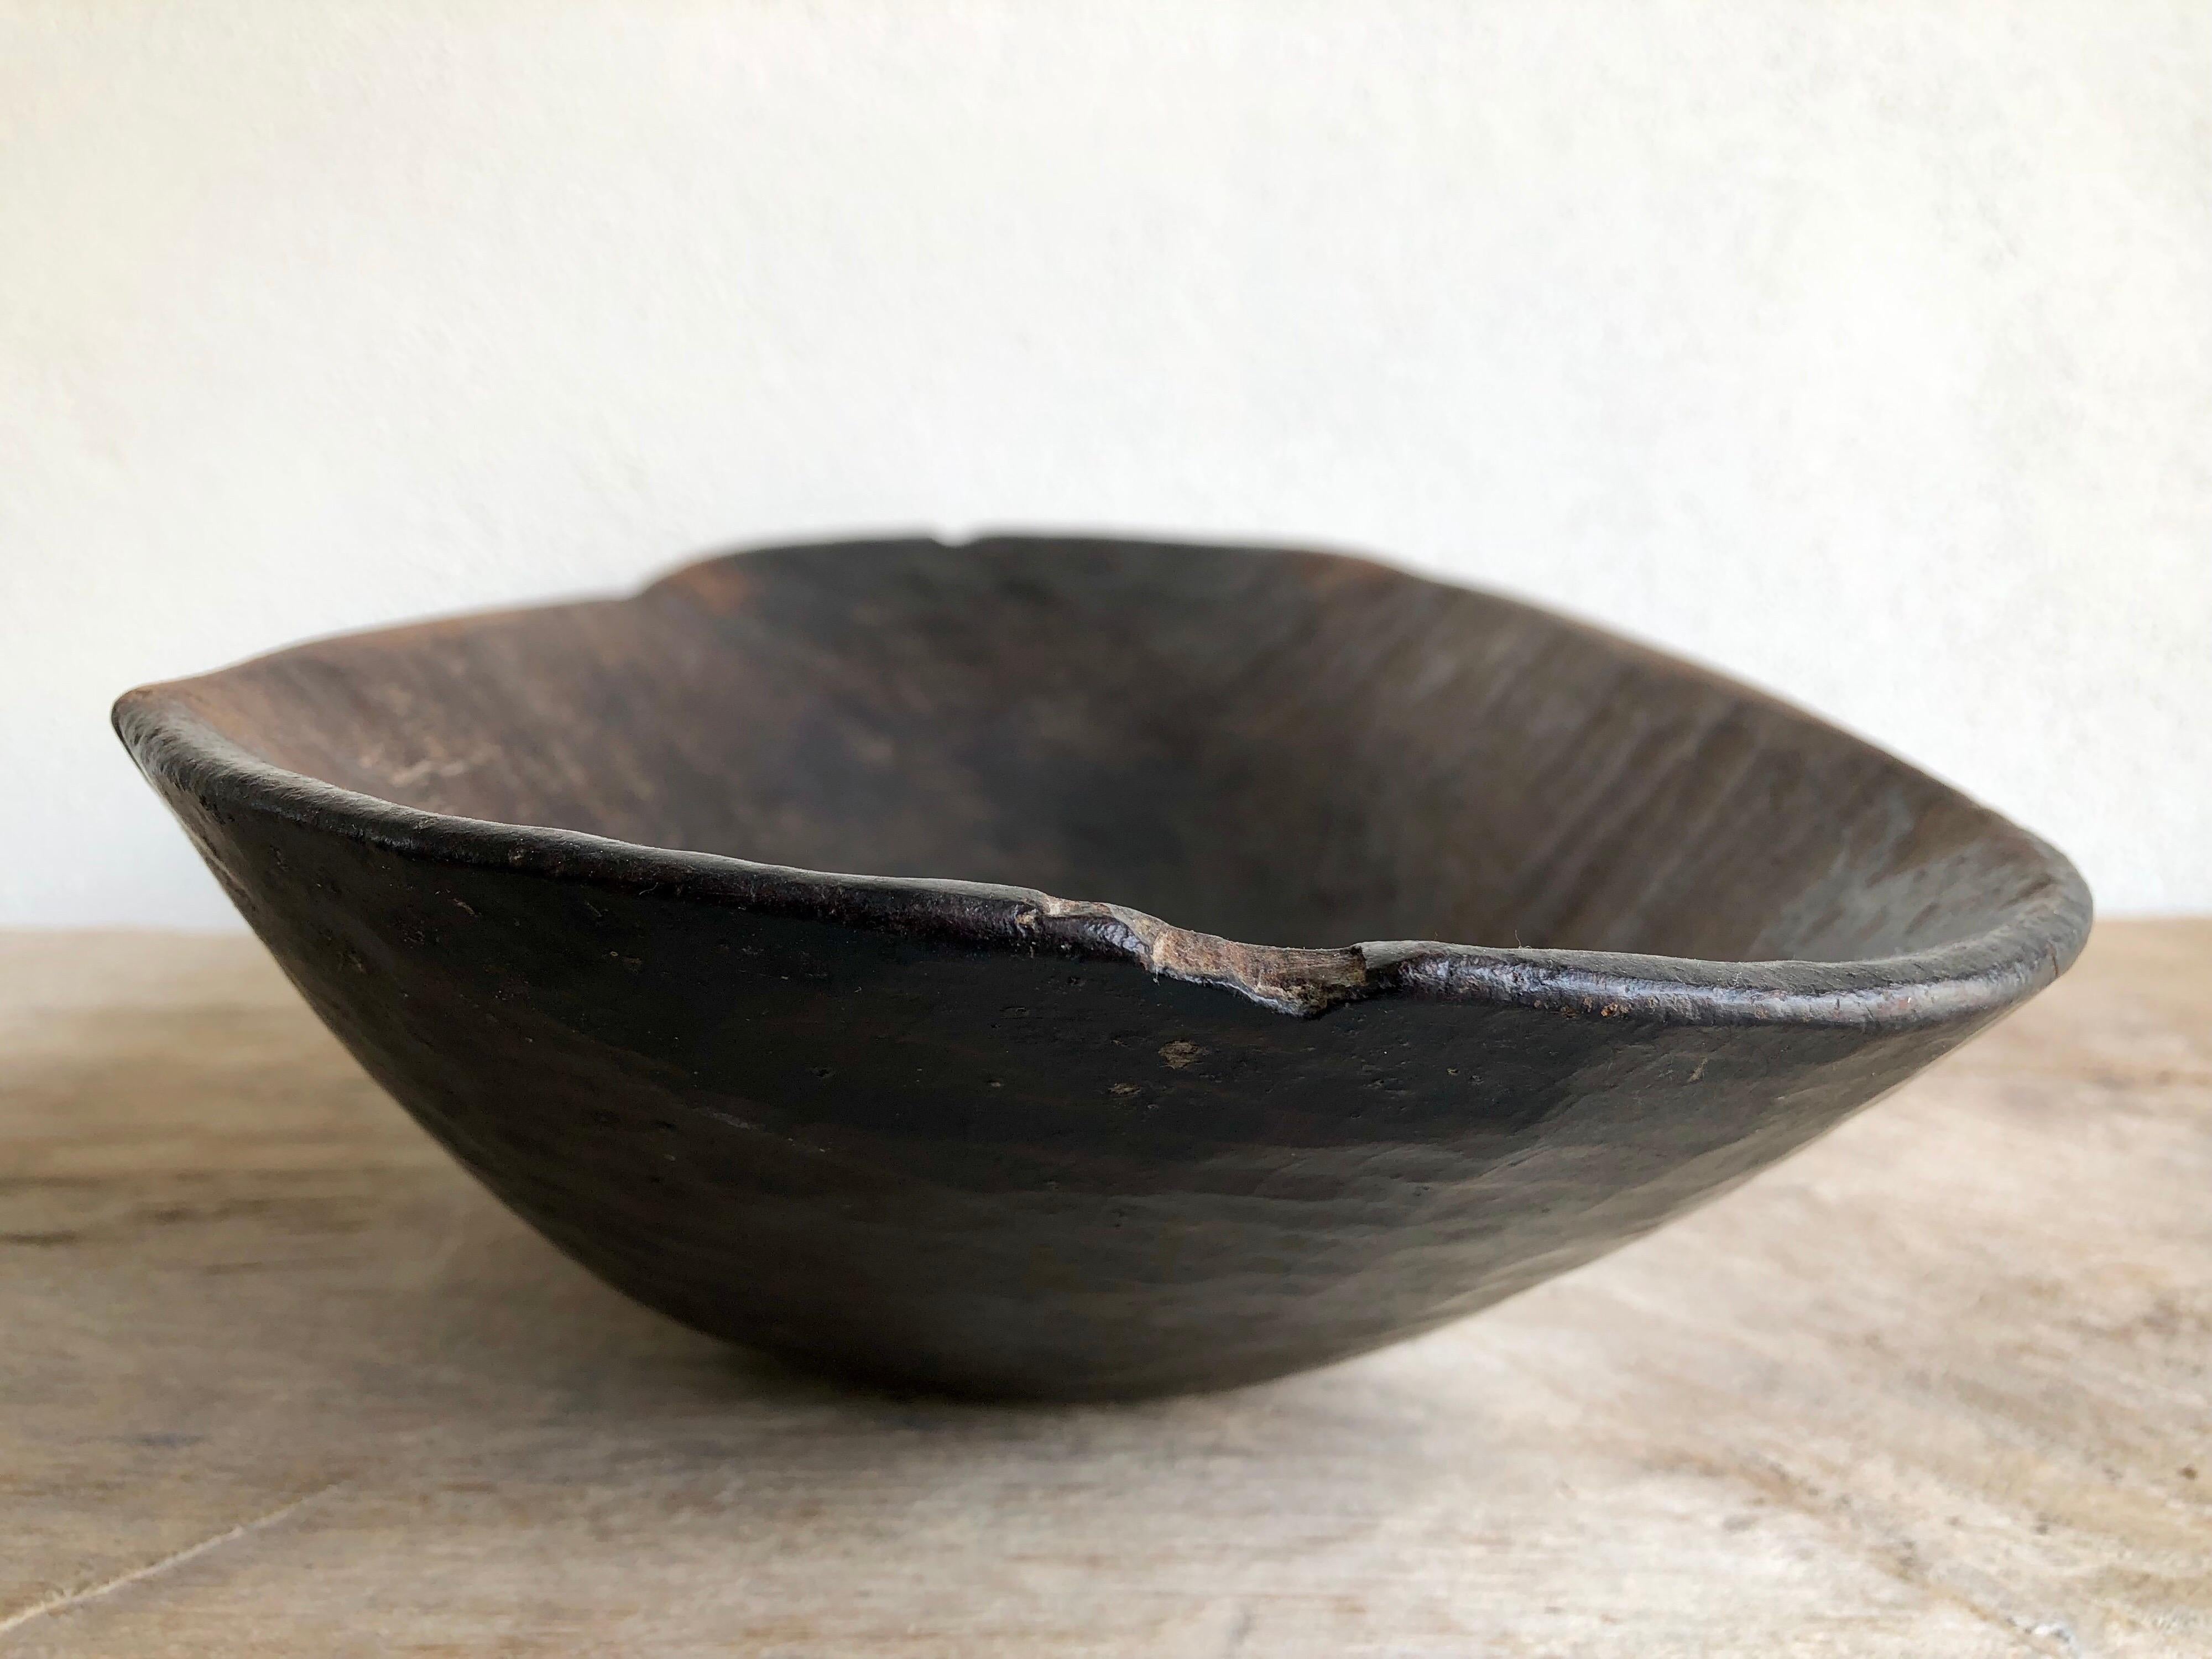 Hardwood Mesquite Bowl from Mexico